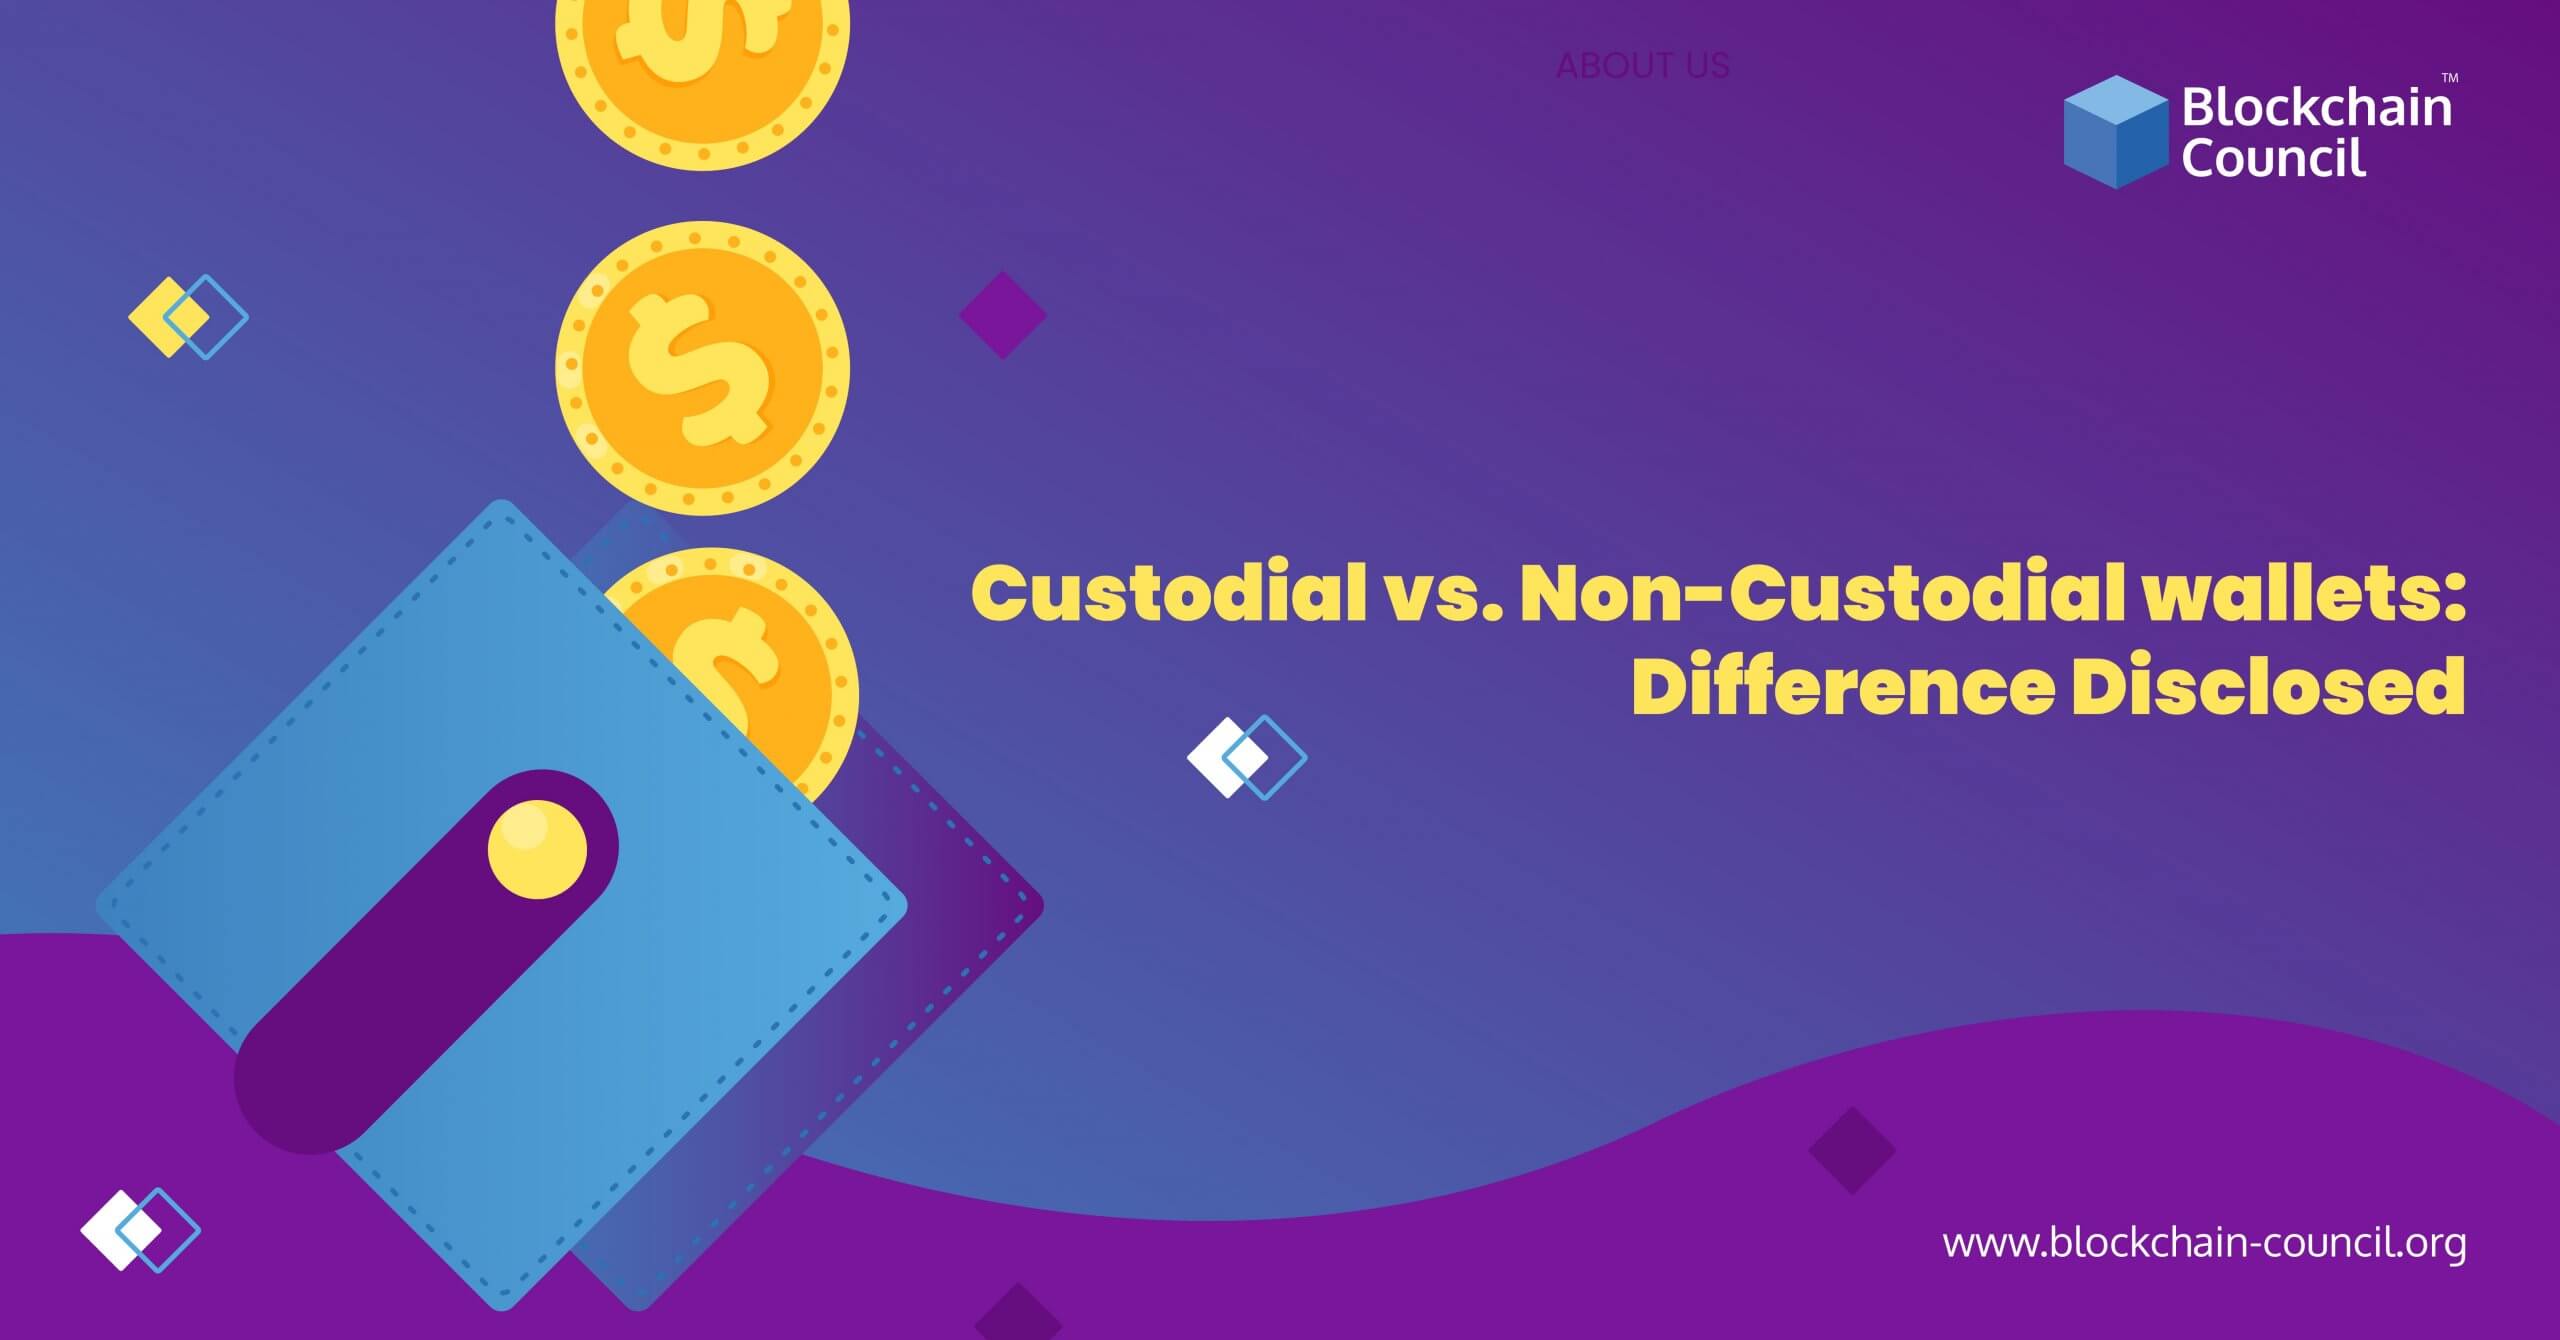 Custodial vs. Non-Custodial wallets: Difference Disclosed